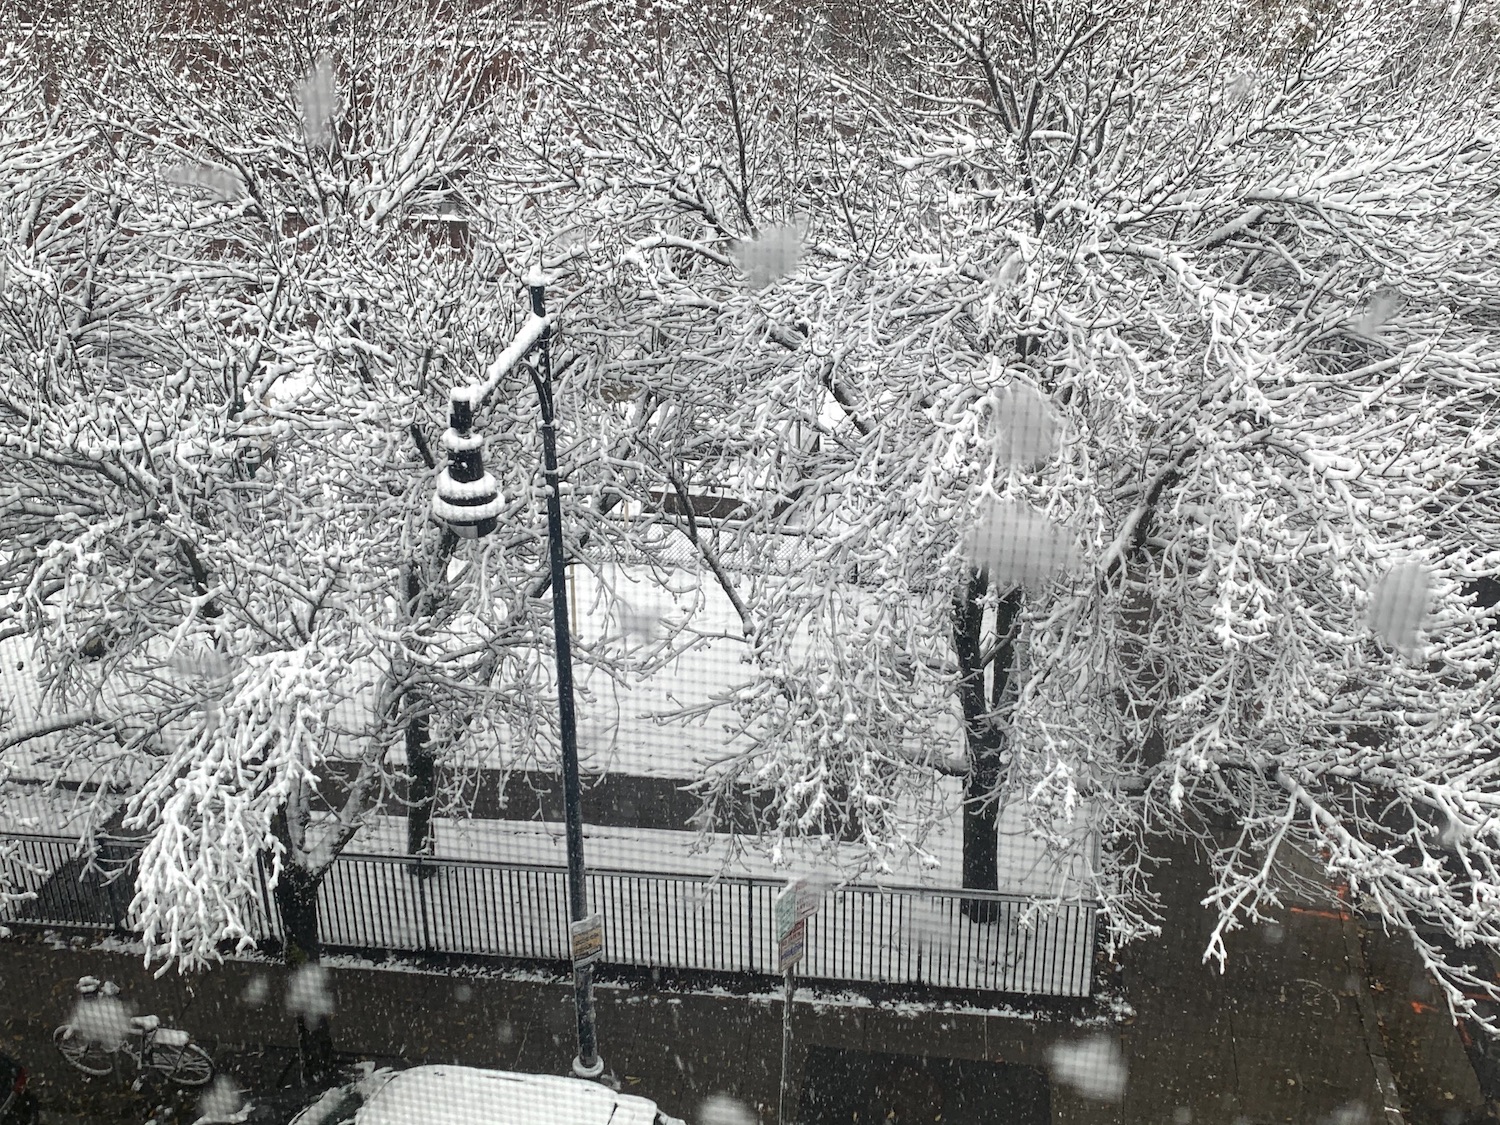 The empty branches outside my boyfriend's window are dusted with snow. This view feels like domestic bliss.